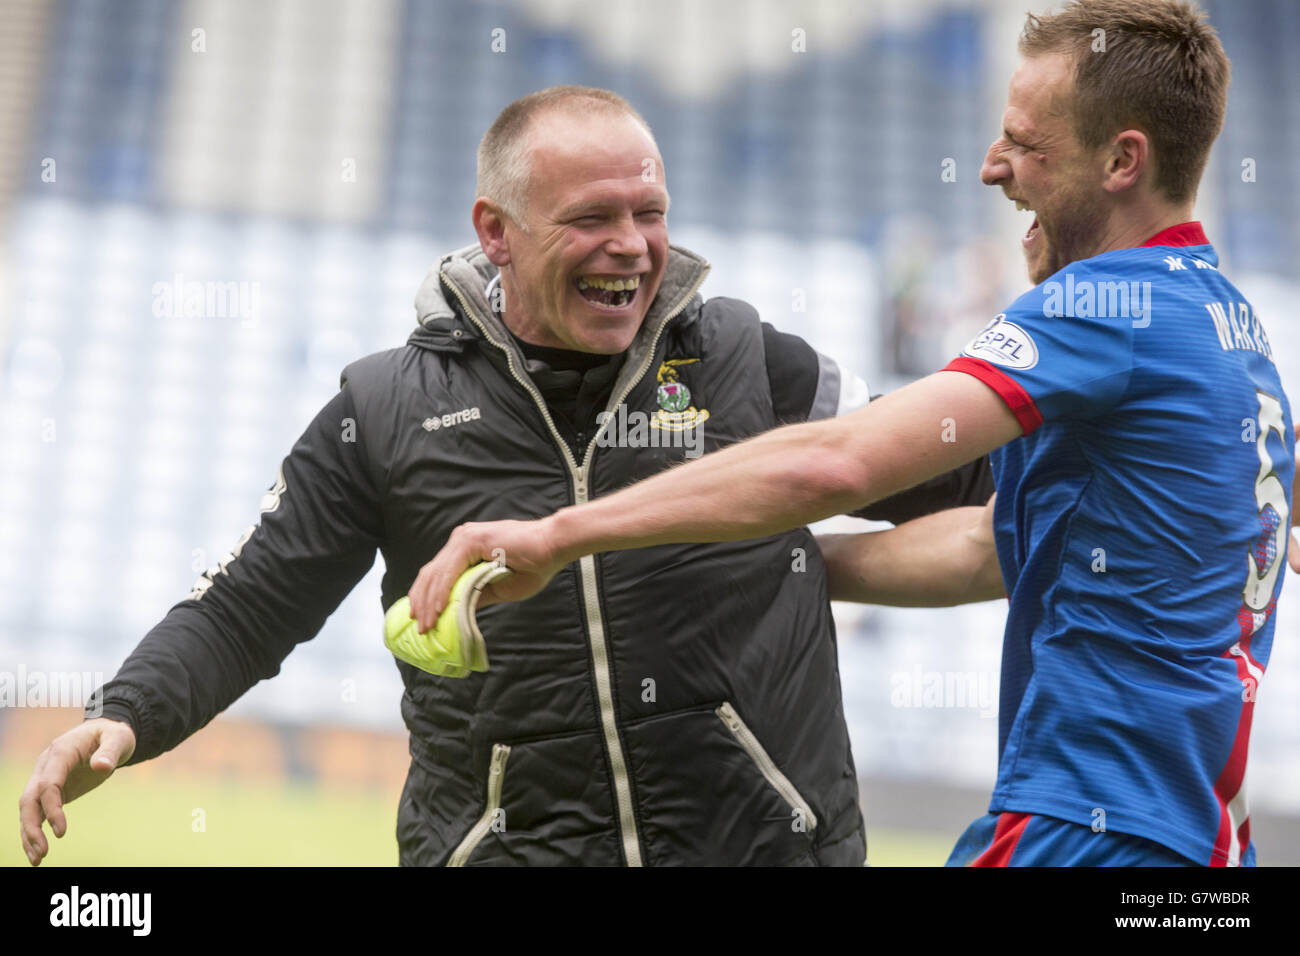 Inverness manager John Hughes celebrates with Gary Warren during the William Hill Scottish Cup Semi Final match at Hampden Park, Glasgow. PRESS ASSOCIATION Photo. Picture date: Sunday April 19, 2015. See PA story SOCCER Inverness. Photo credit should read: Jeff Holmes/PA Wire. Stock Photo